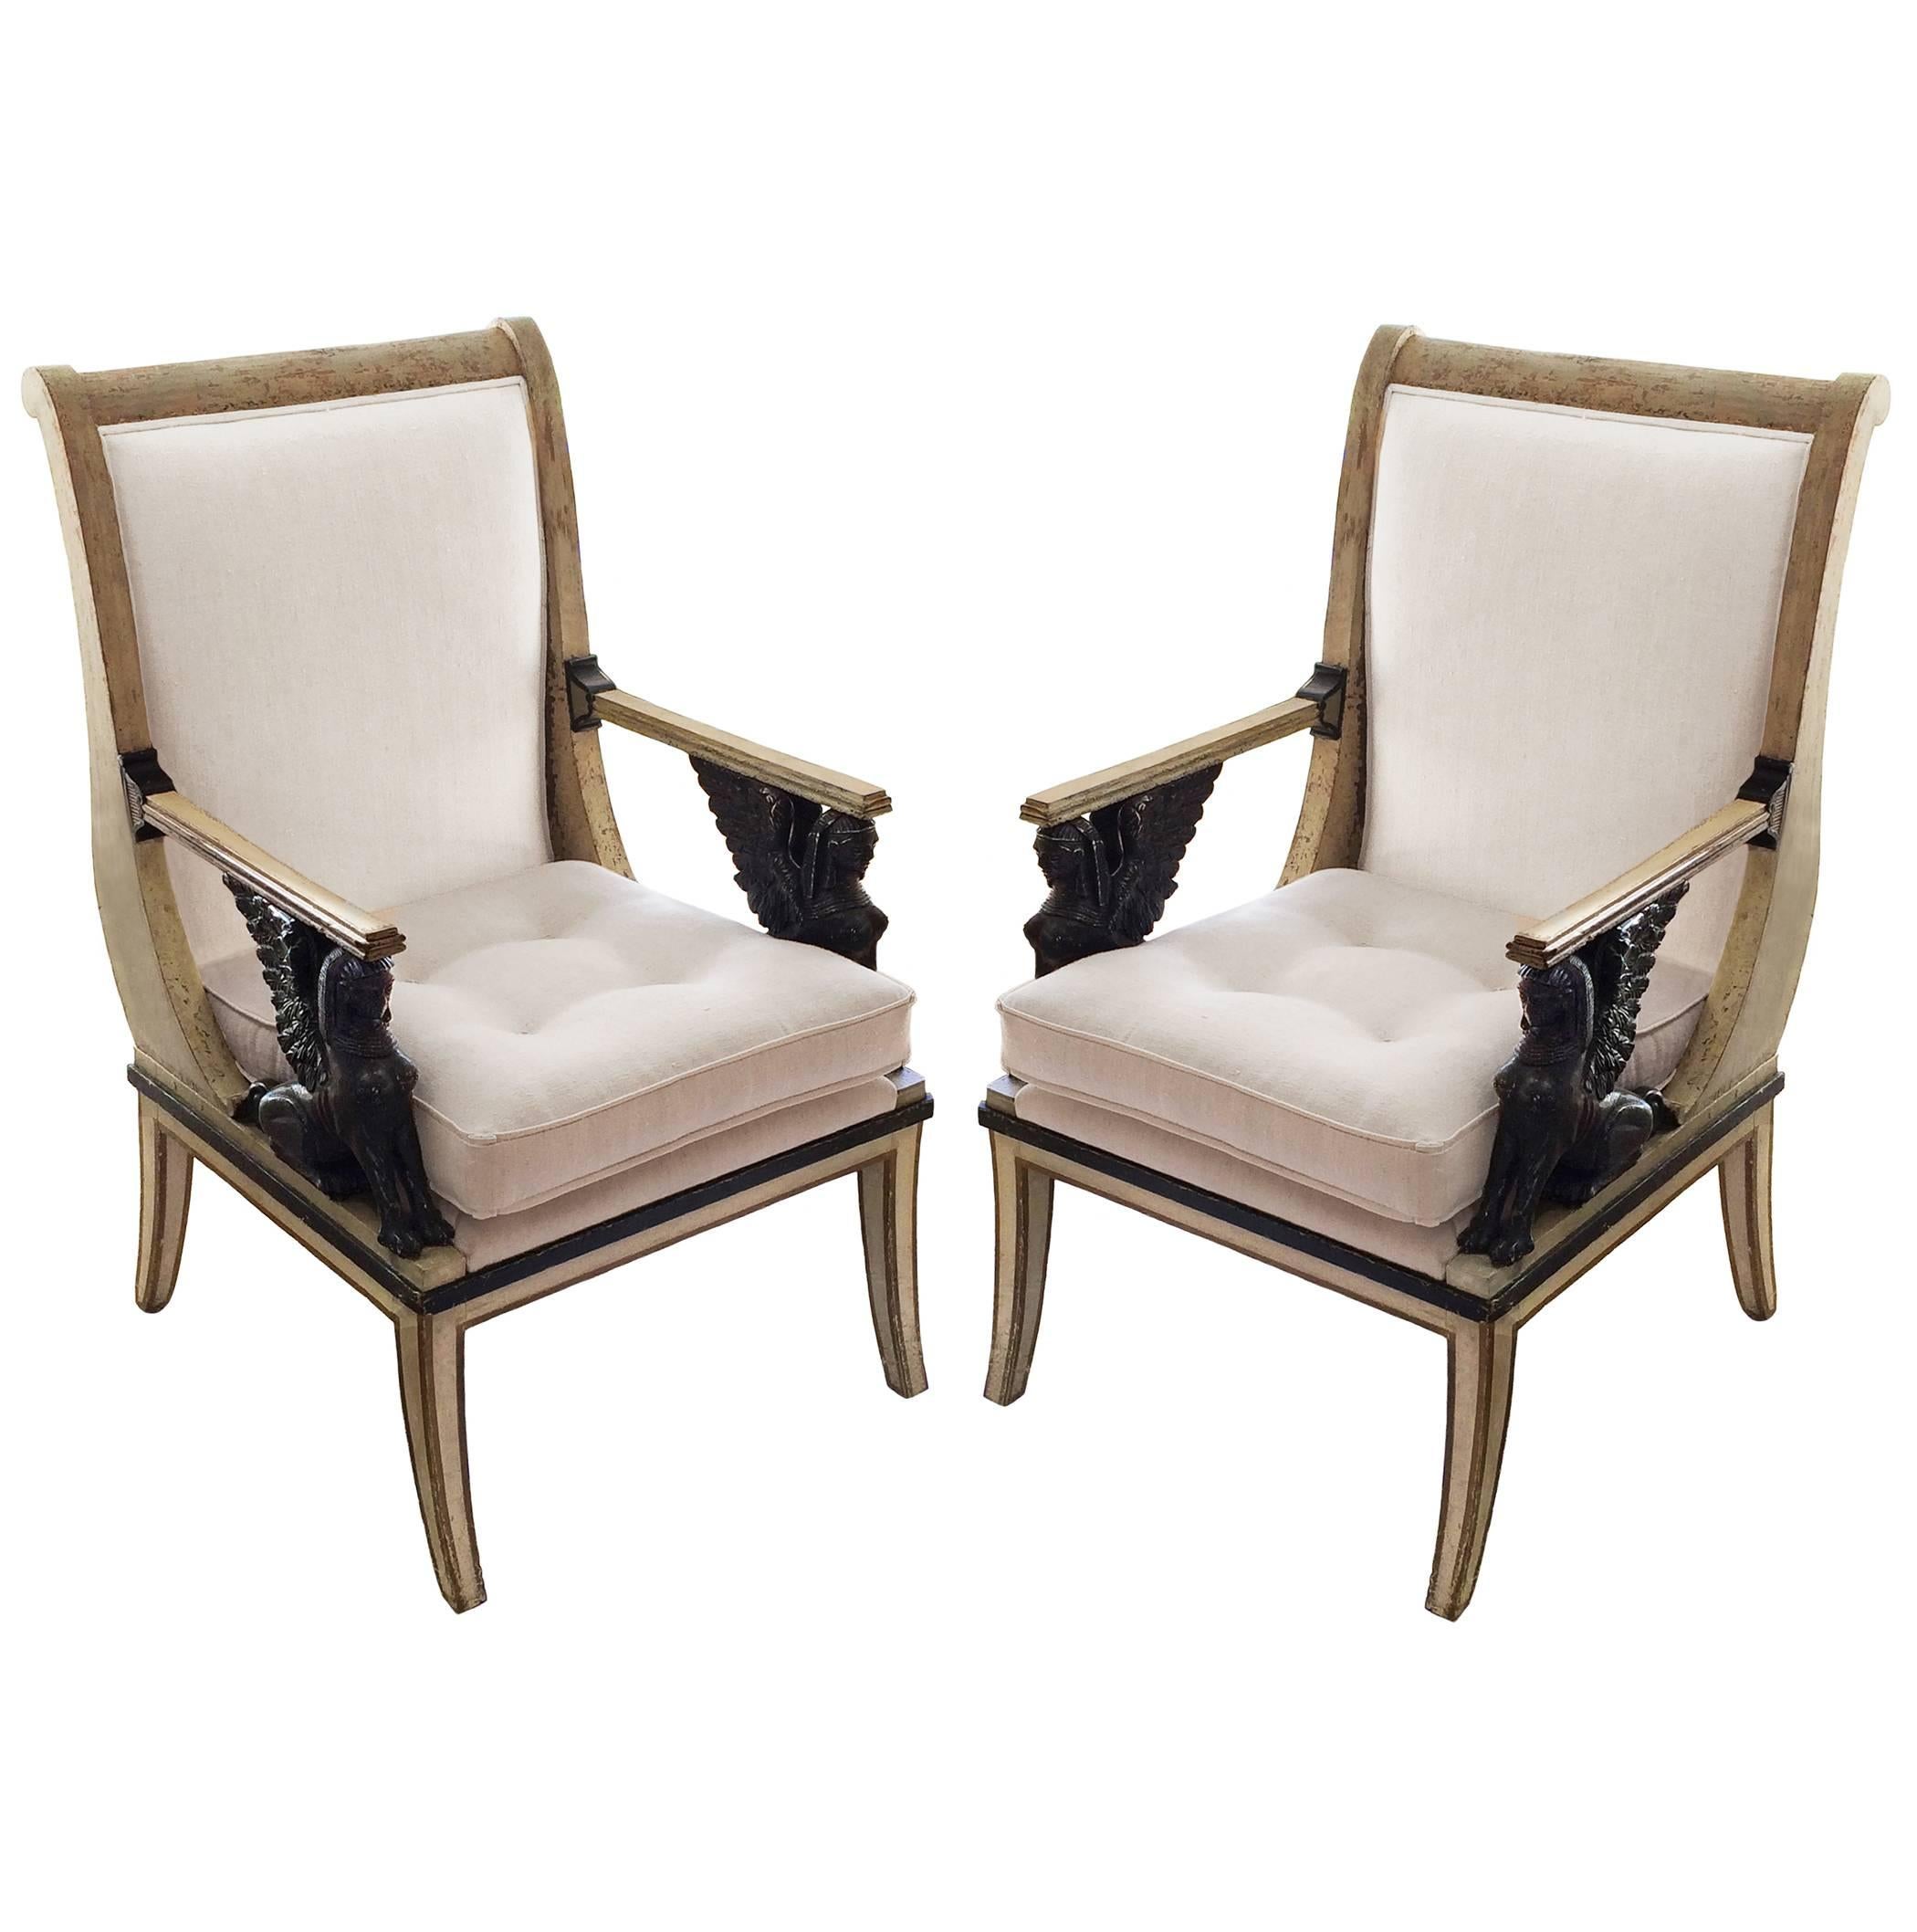 19th Century Pair of Swedish Empire Chairs For Sale